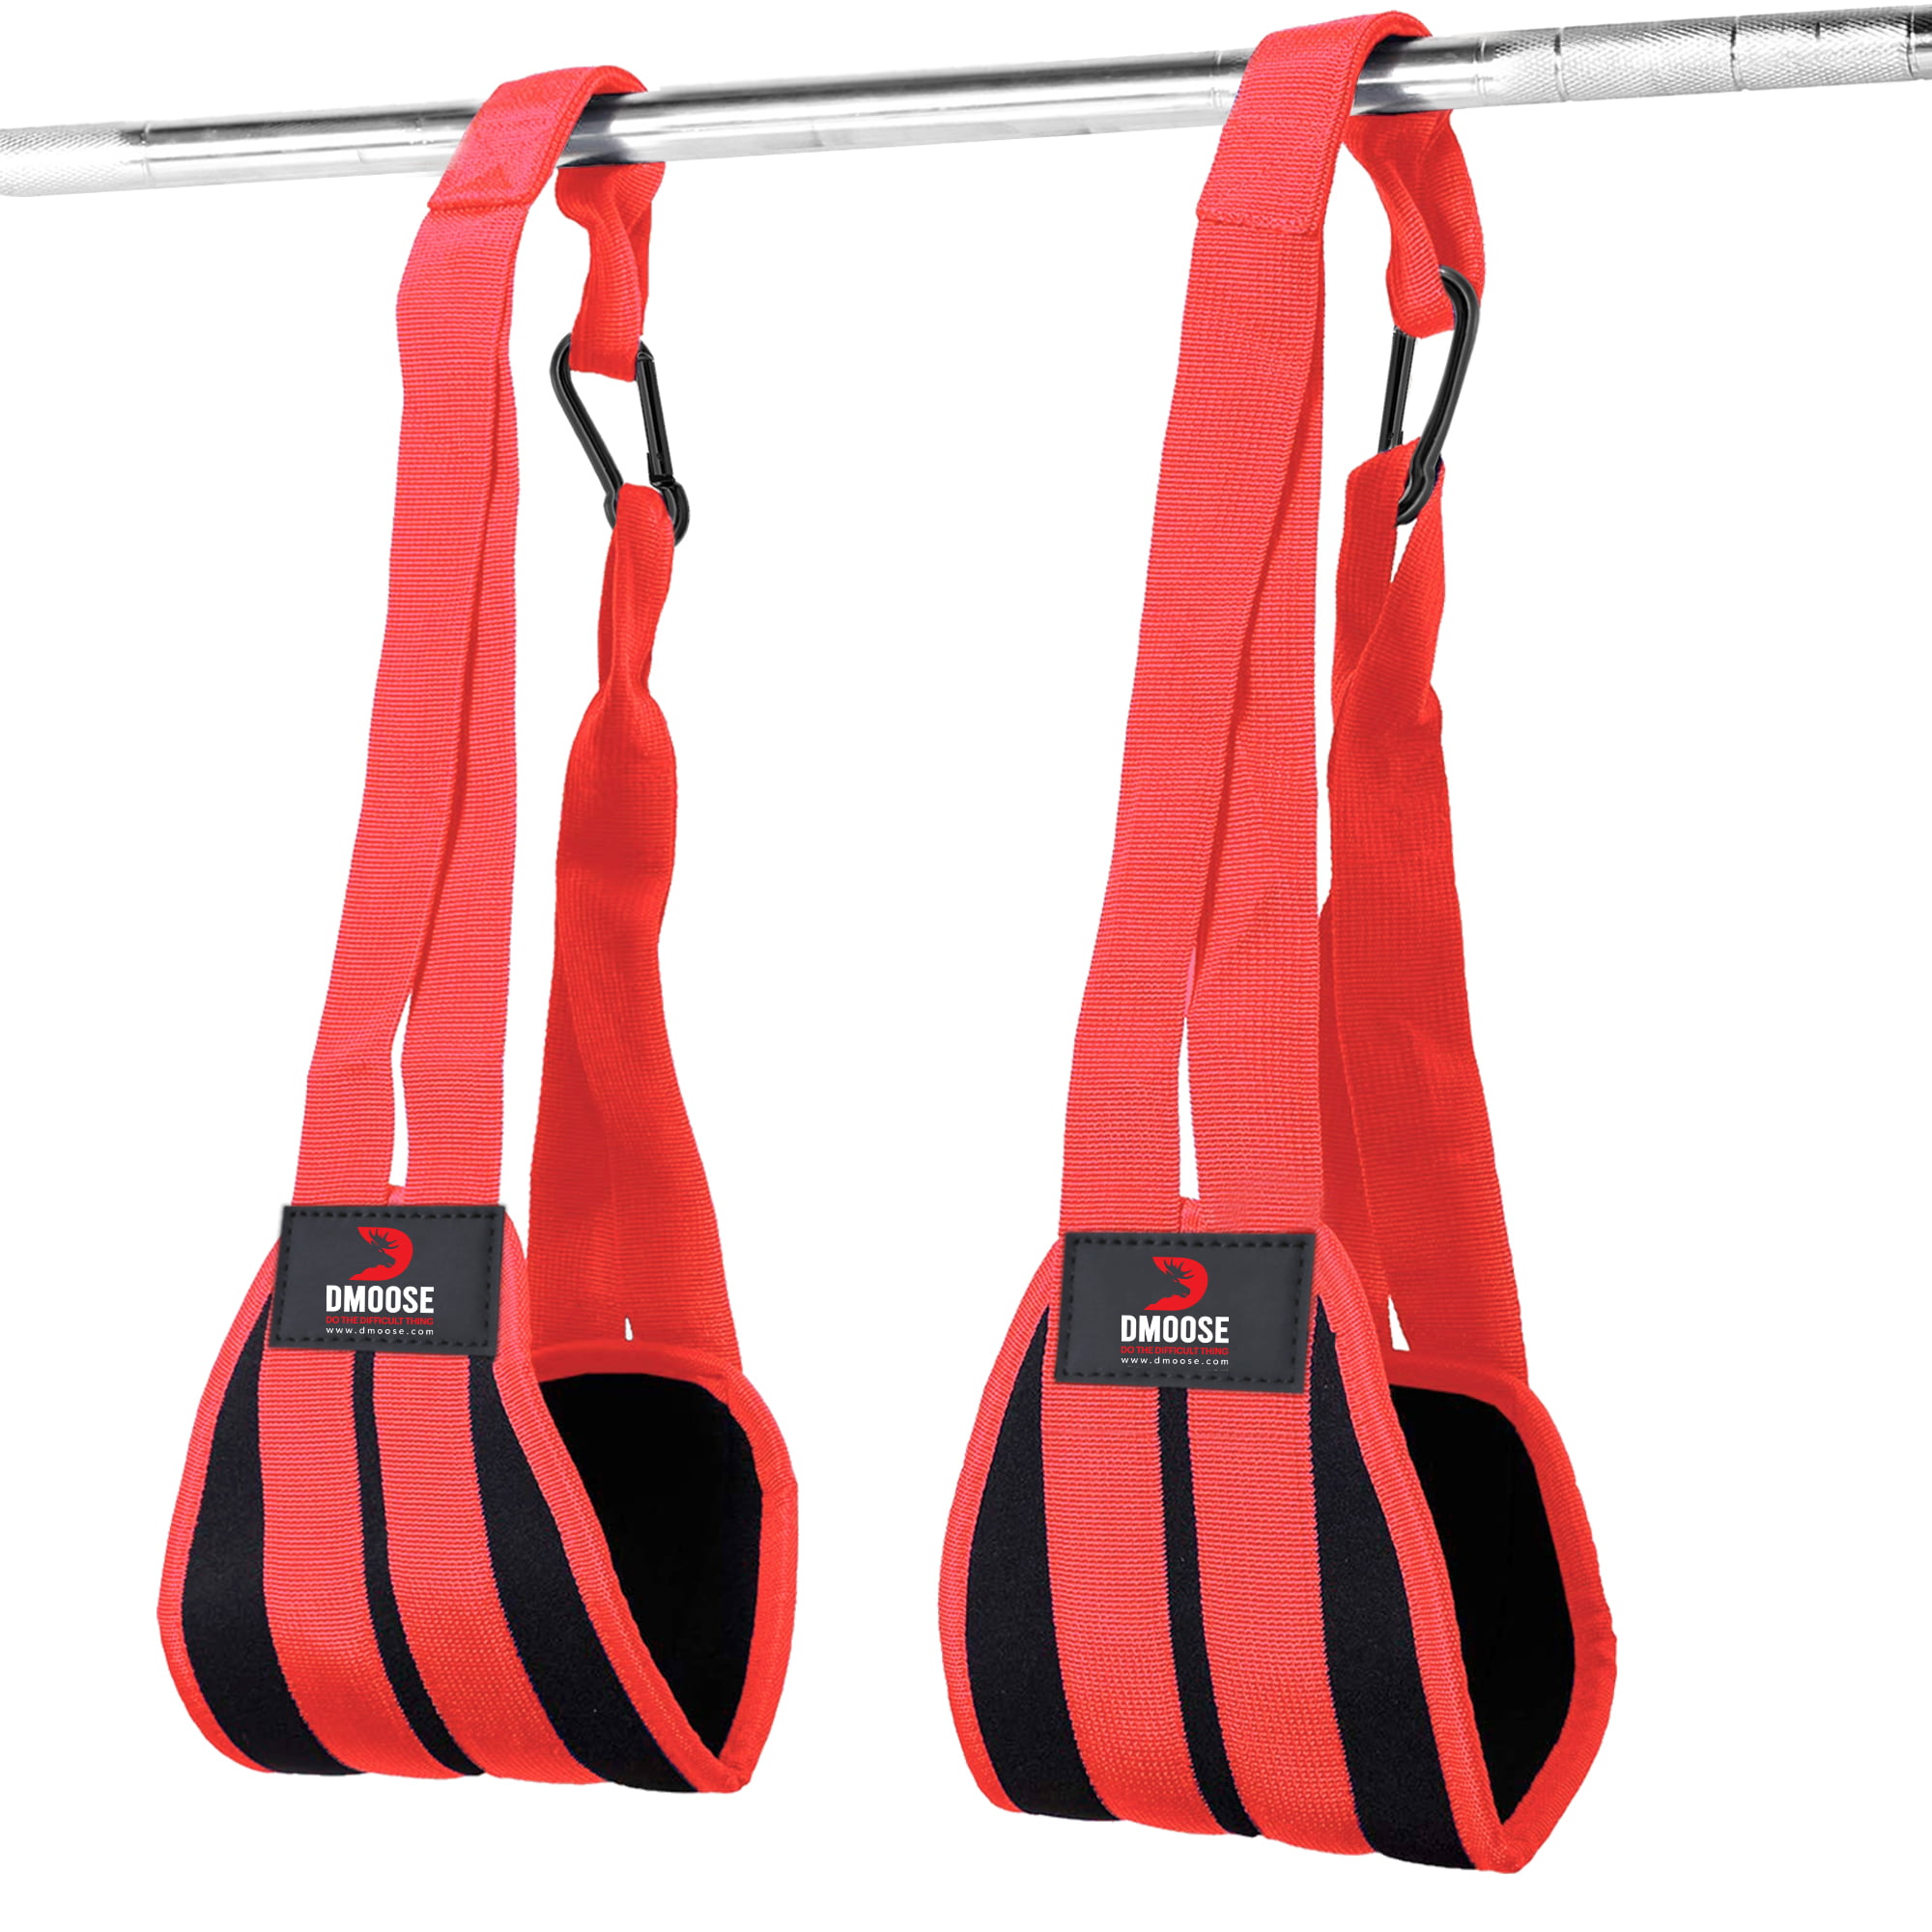 DMoose Hanging Ab Straps for Abdominal Muscle Building and